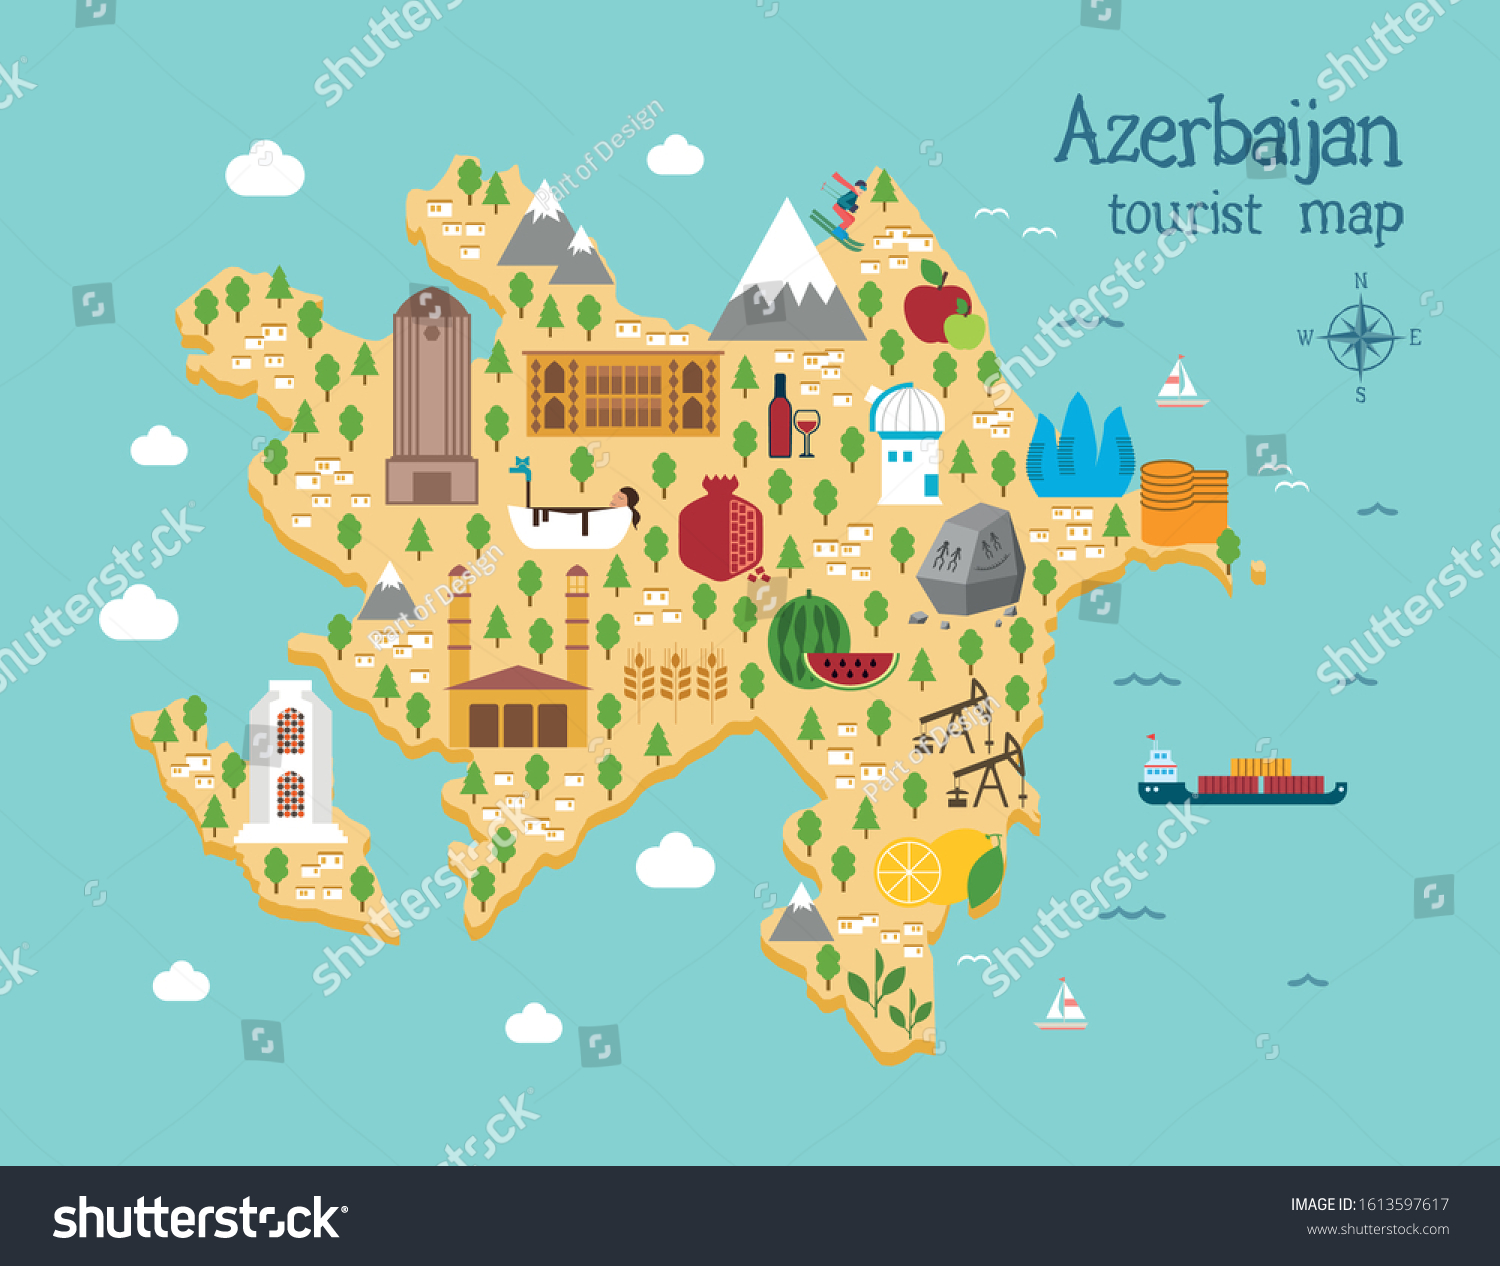 SVG of Azerbaijan cartoon tourist map with the main landmarks of the regions. Flat illustrated map svg